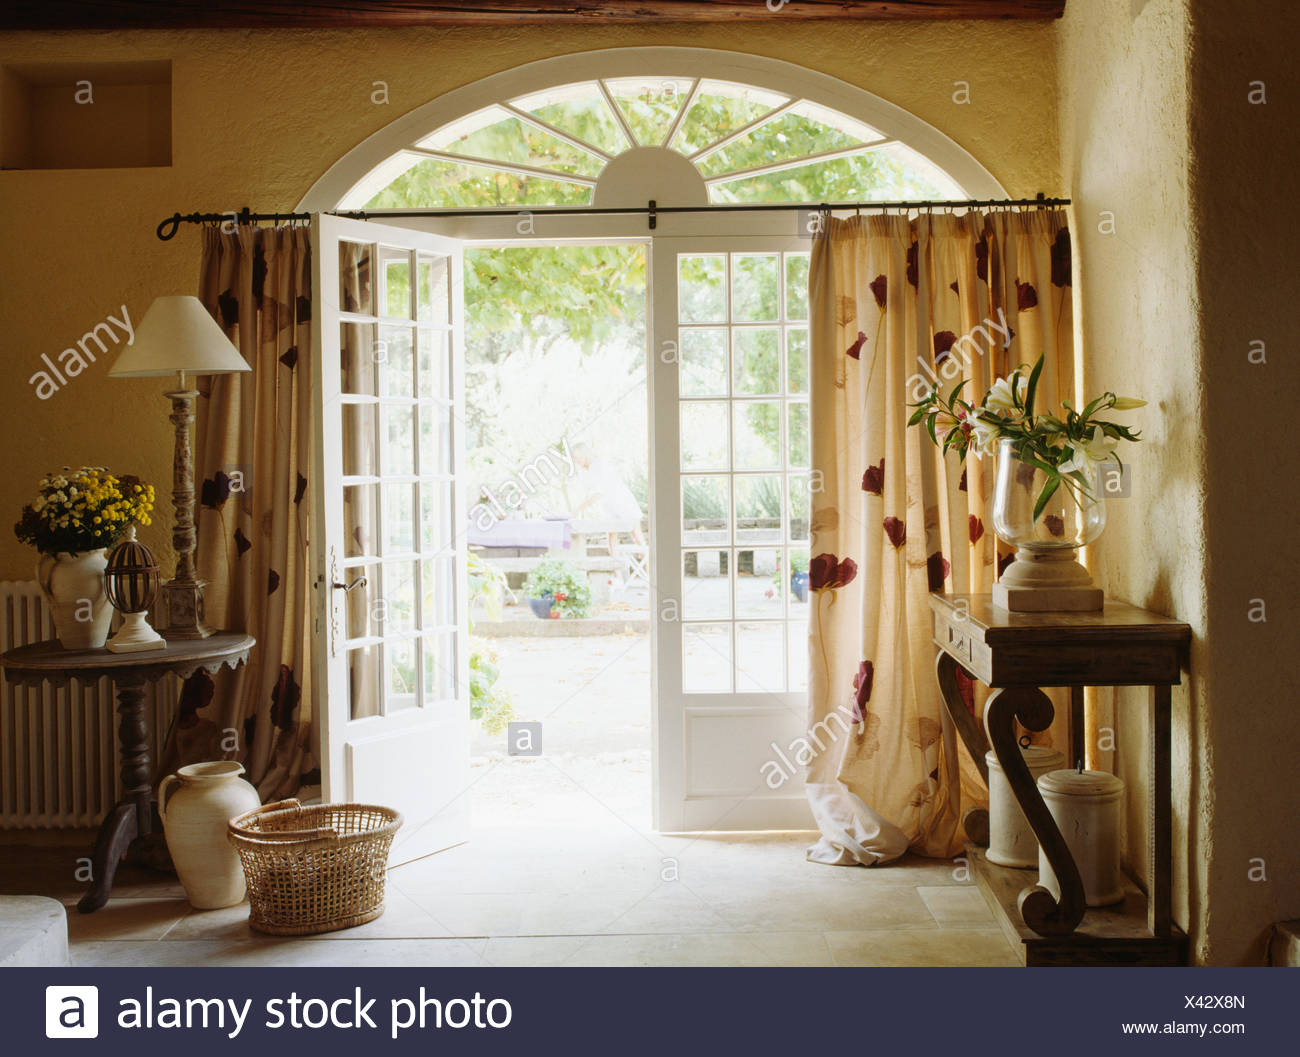 French Country Hall With Patterned Cream Curtain On Half